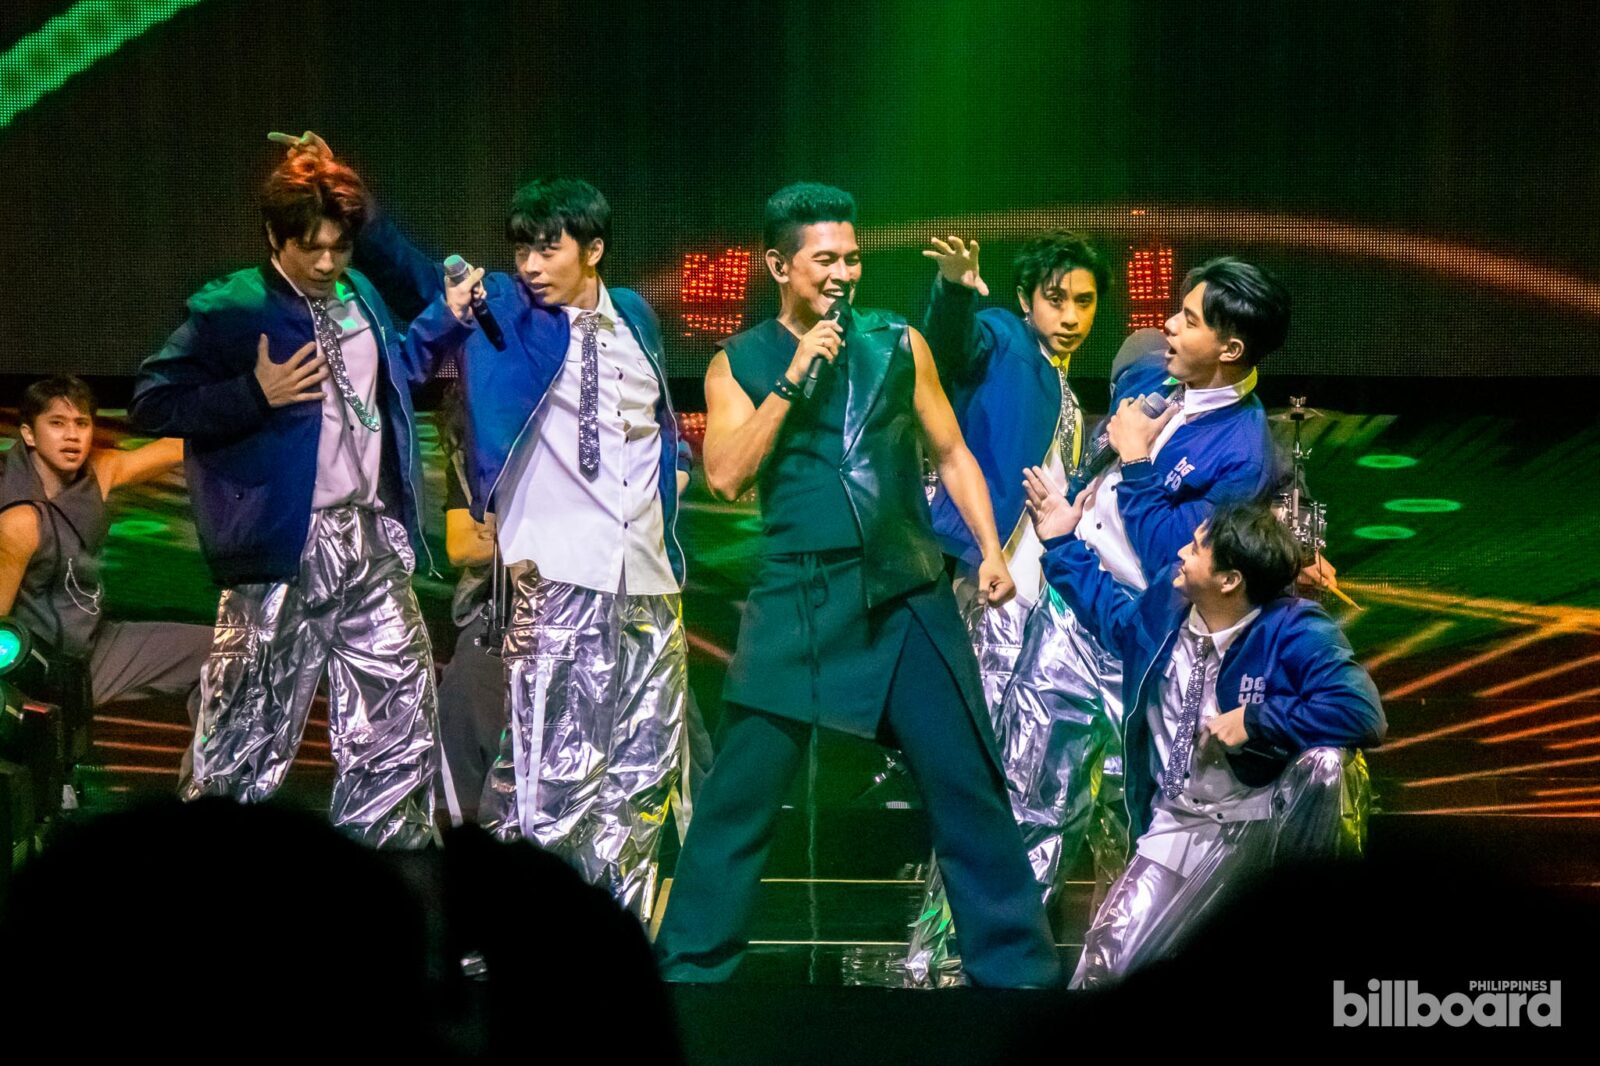 Gary Valenciano with special guest P-Pop Boy Group, BGYO performing at his 40th Anniversary Concert 'Pure Energy'